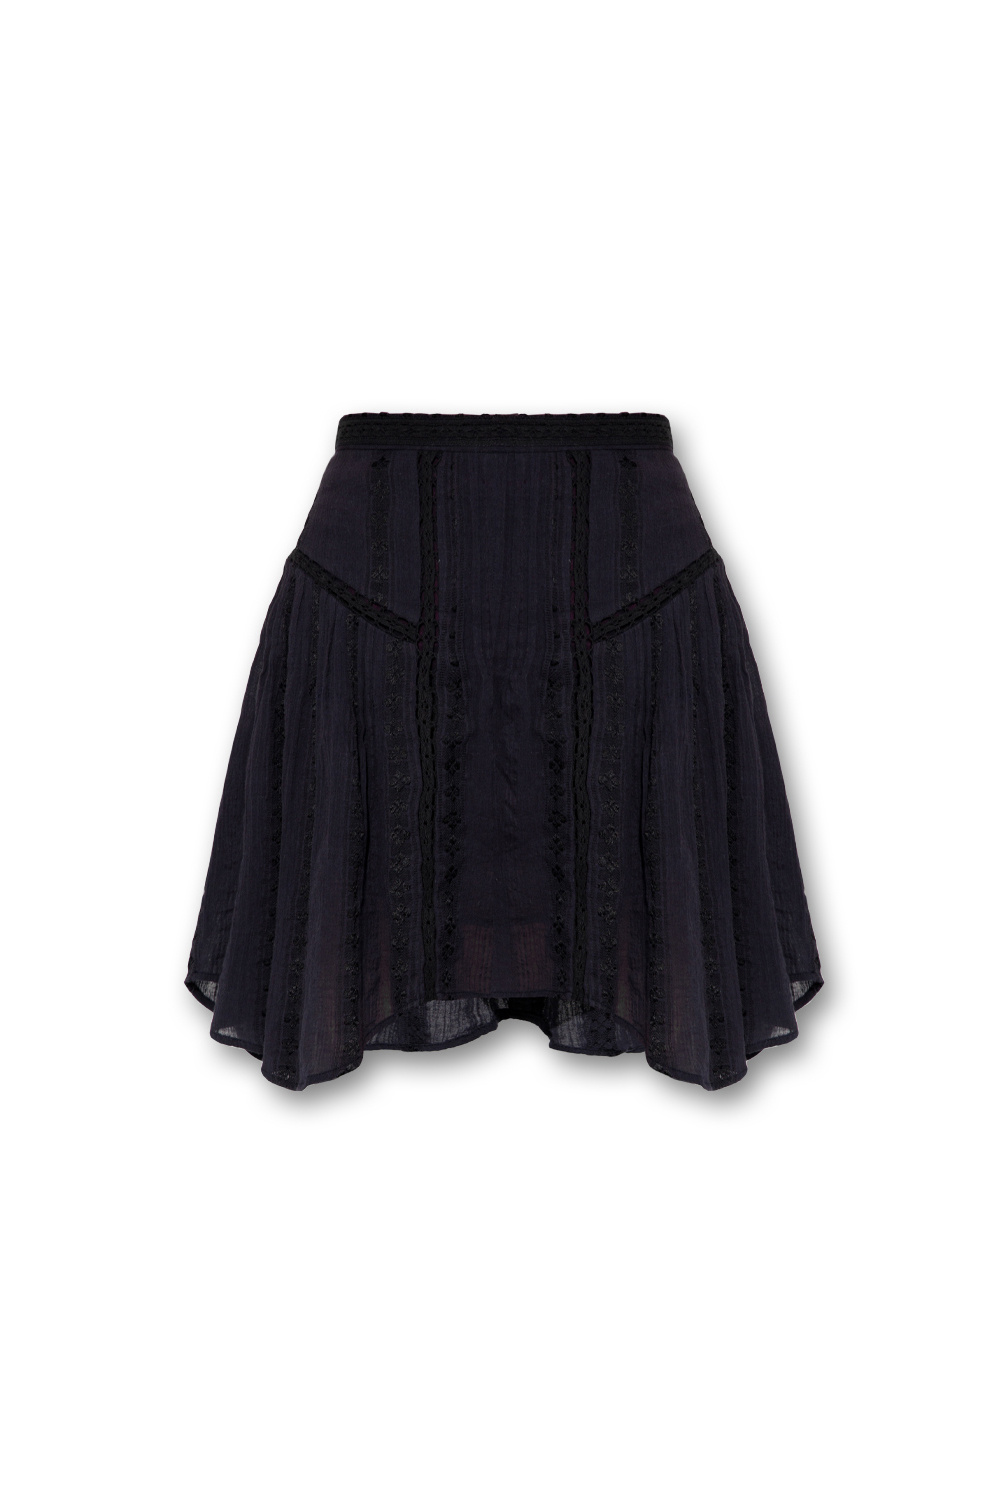 Check out the most fashionable models ‘Jorena’ cotton skirt